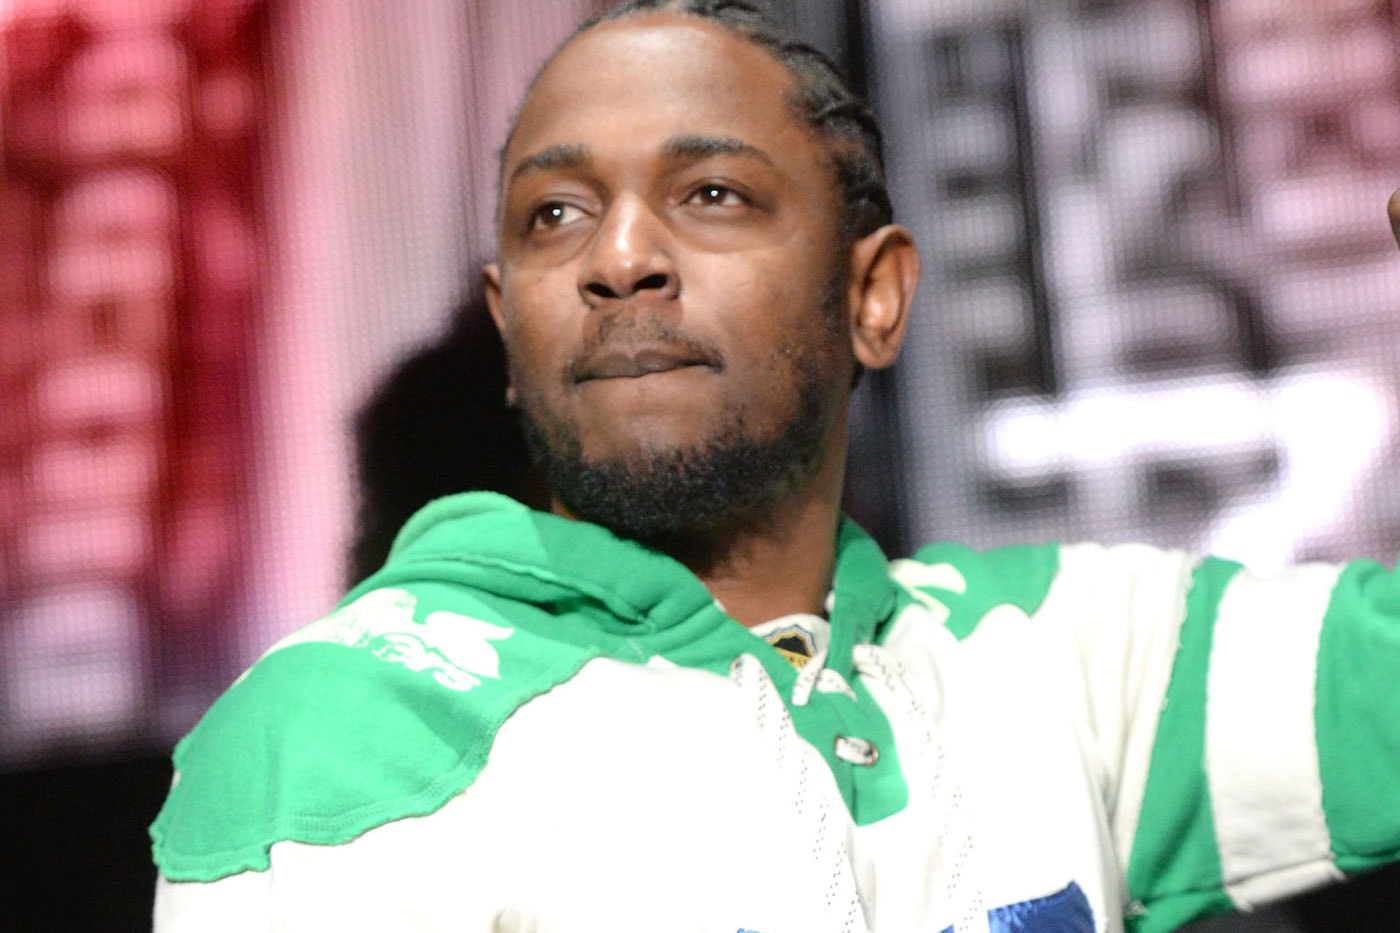 Kendrick Lamar Leads With 11 Grammy Nominations